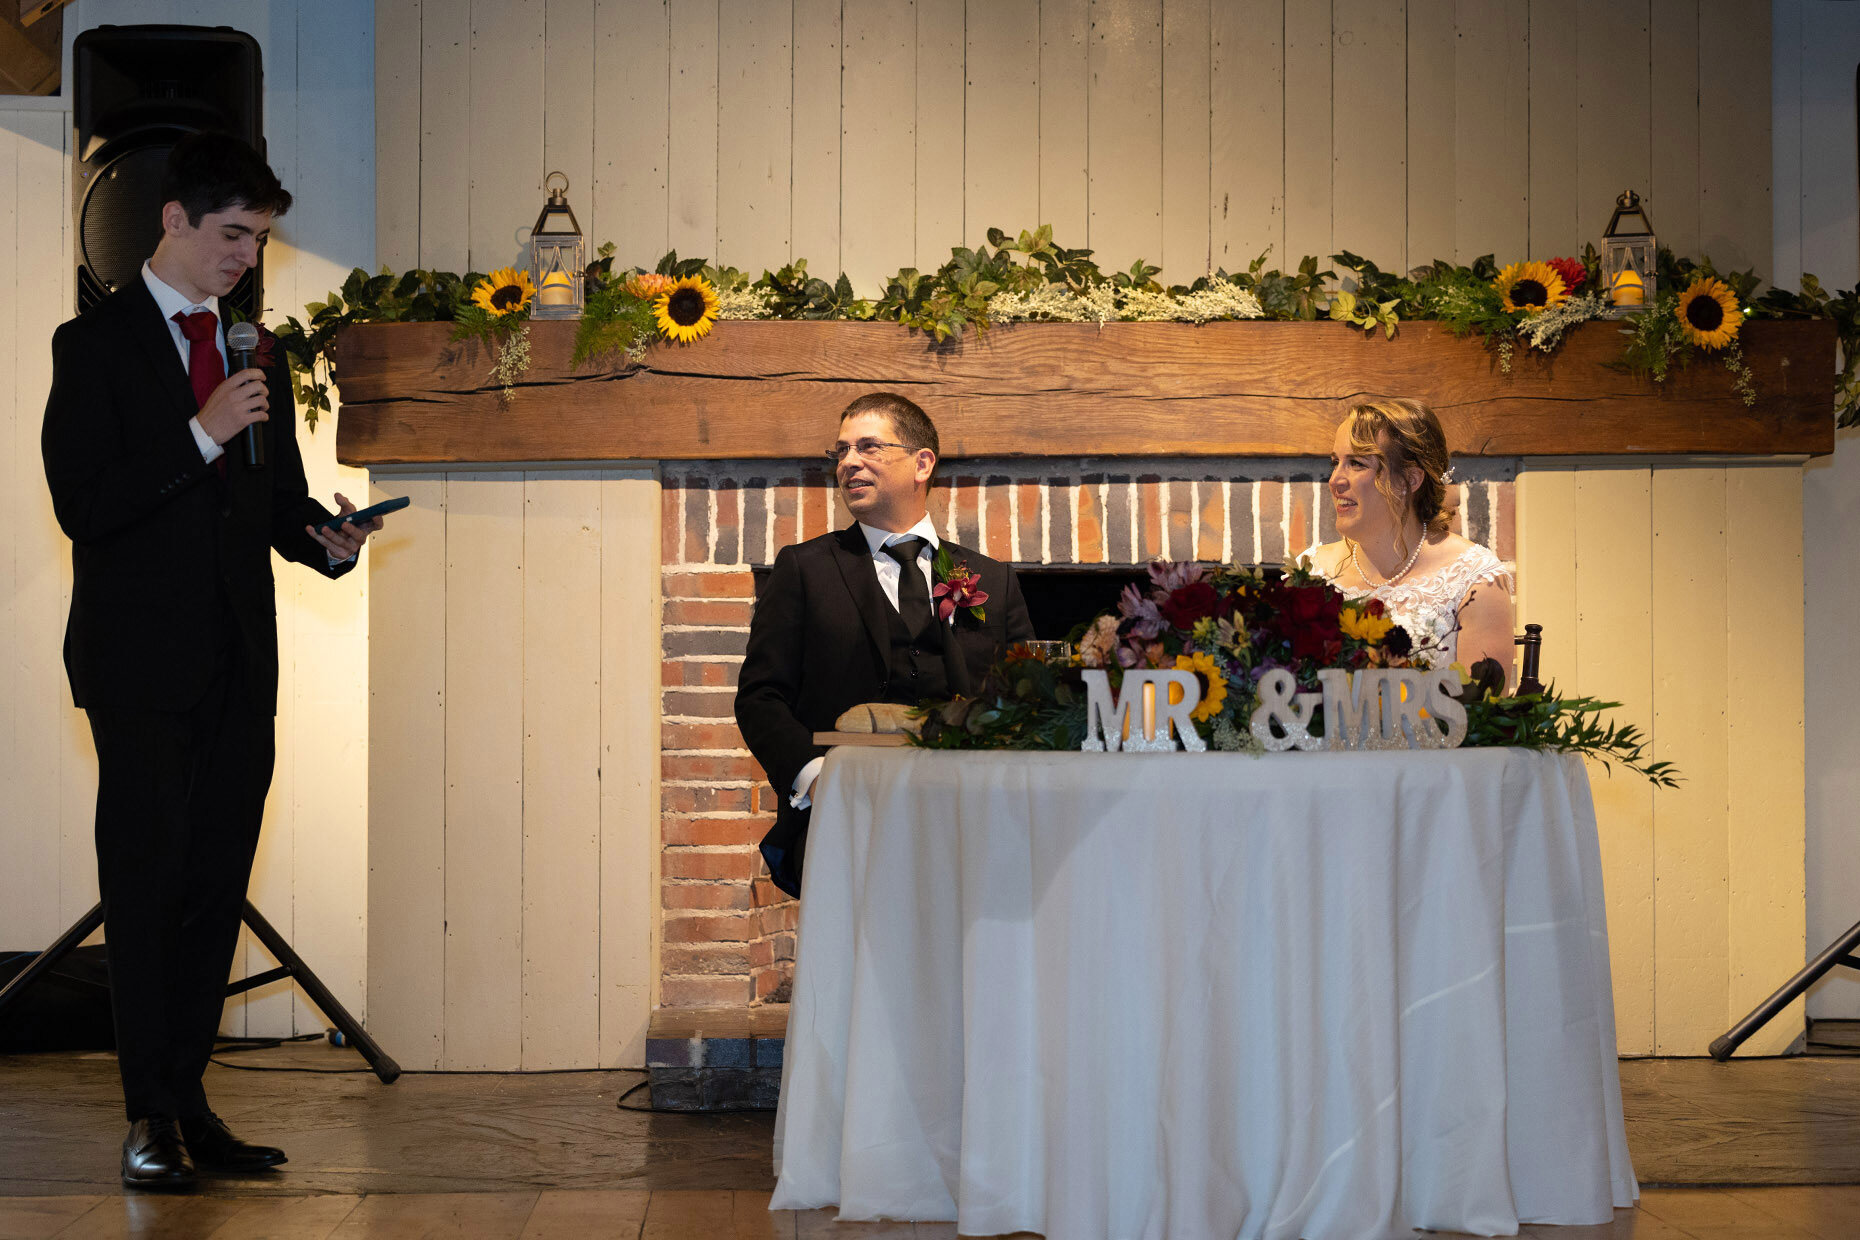 Son of Groom gives toast at reception 